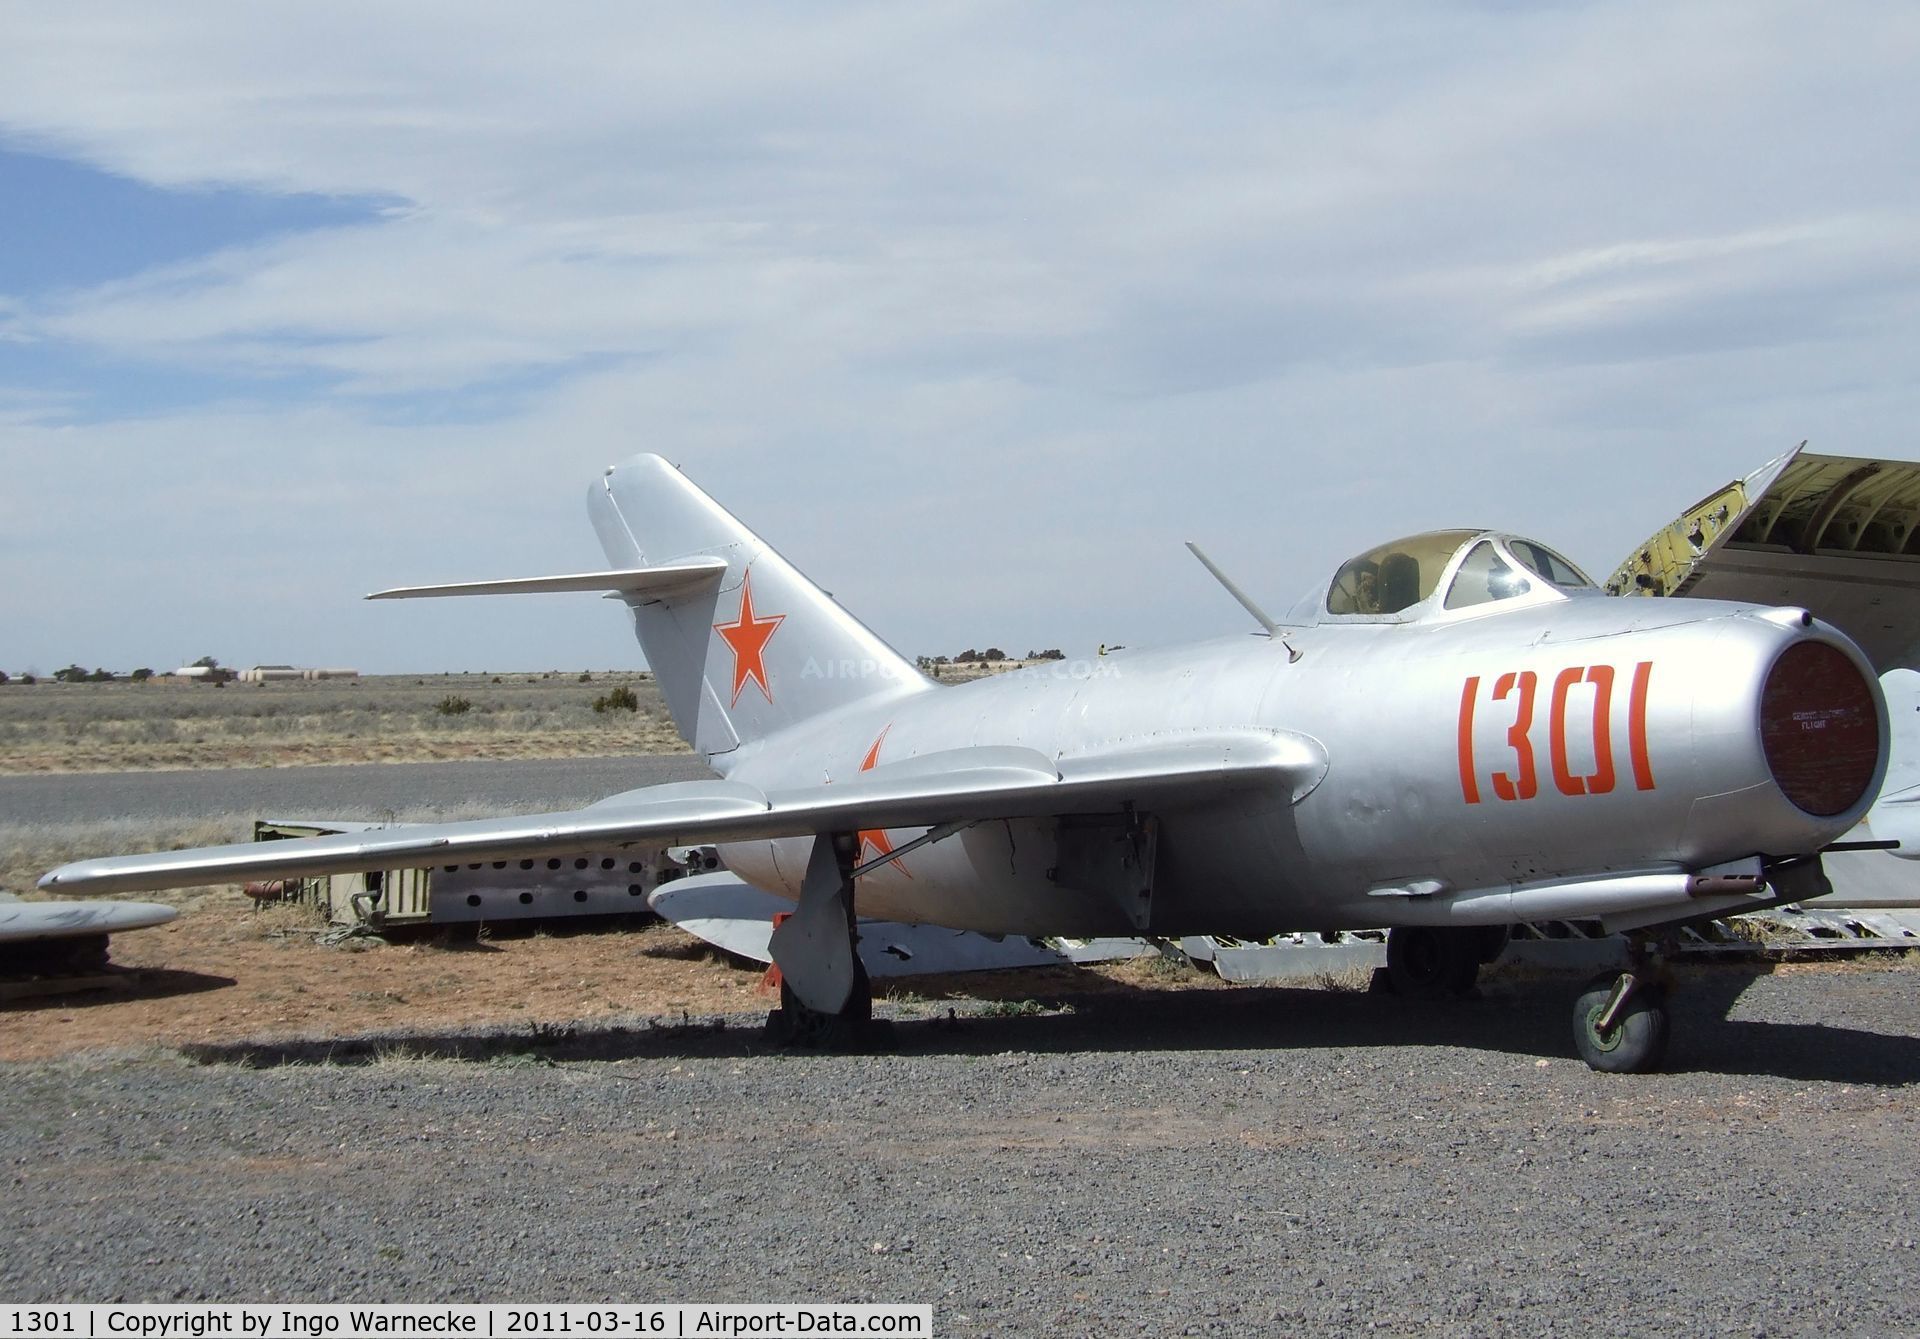 1301, Mikoyan-Gurevich MiG-15 C/N 5058, Mikoyan i Gurevich MiG-15 FAGOT at the Planes of Fame Air Museum, Valle AZ